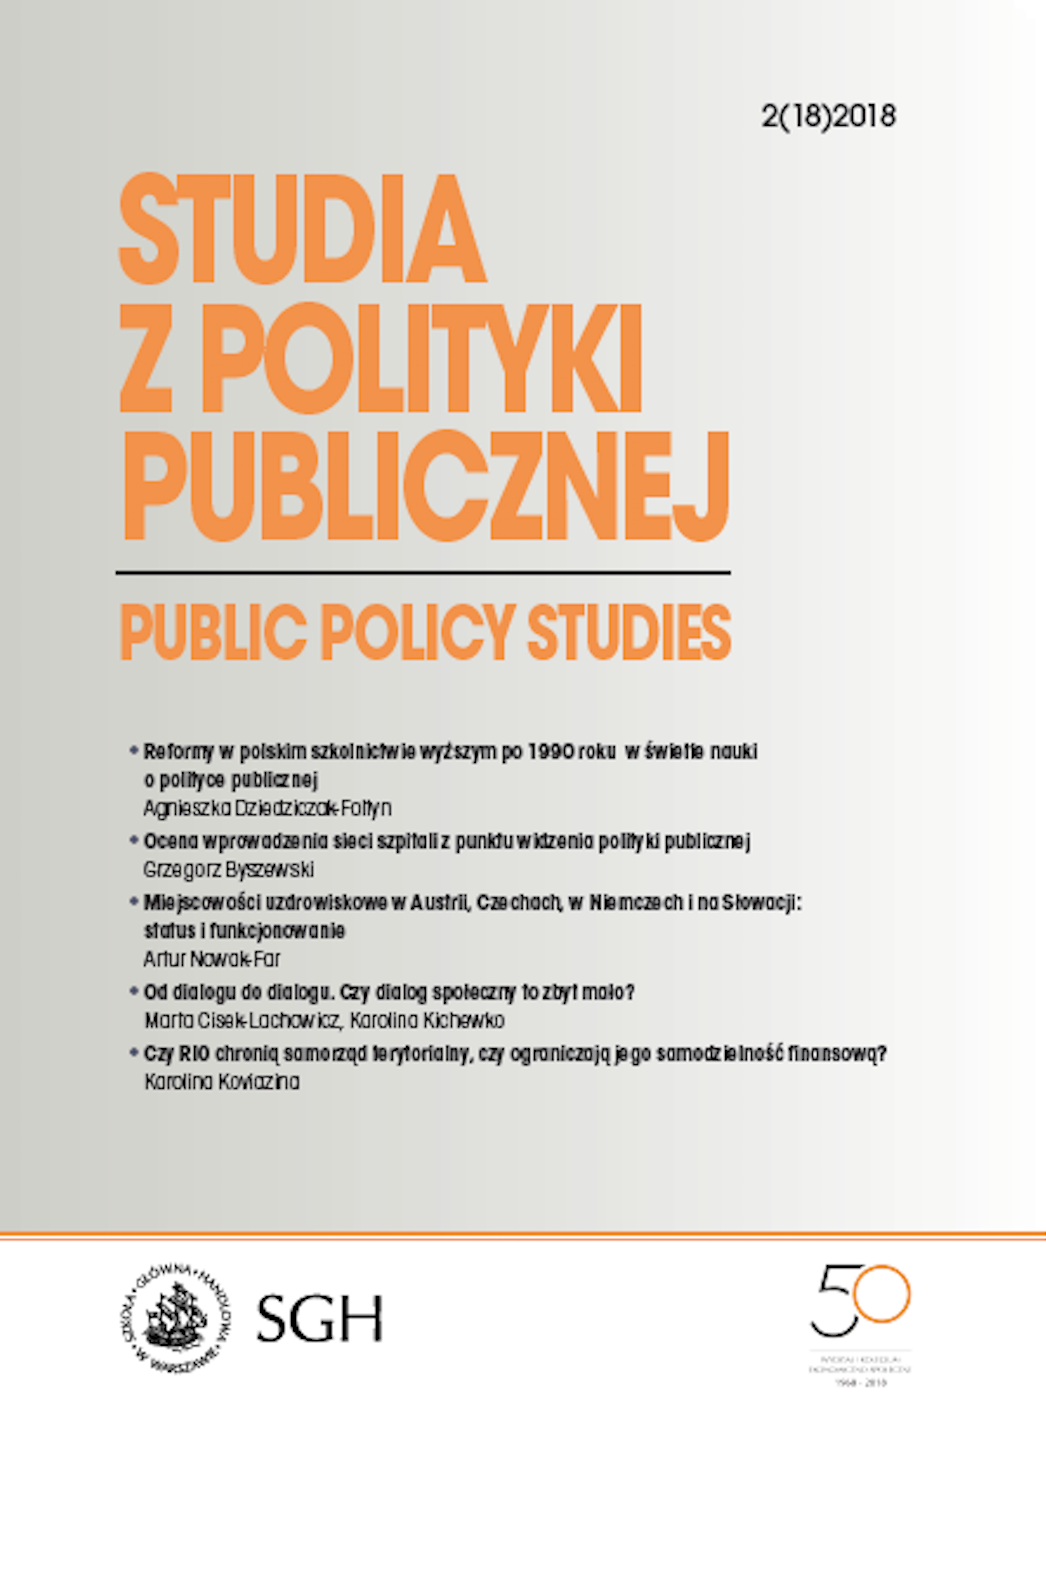 EU member states tax policy as a public policy Cover Image